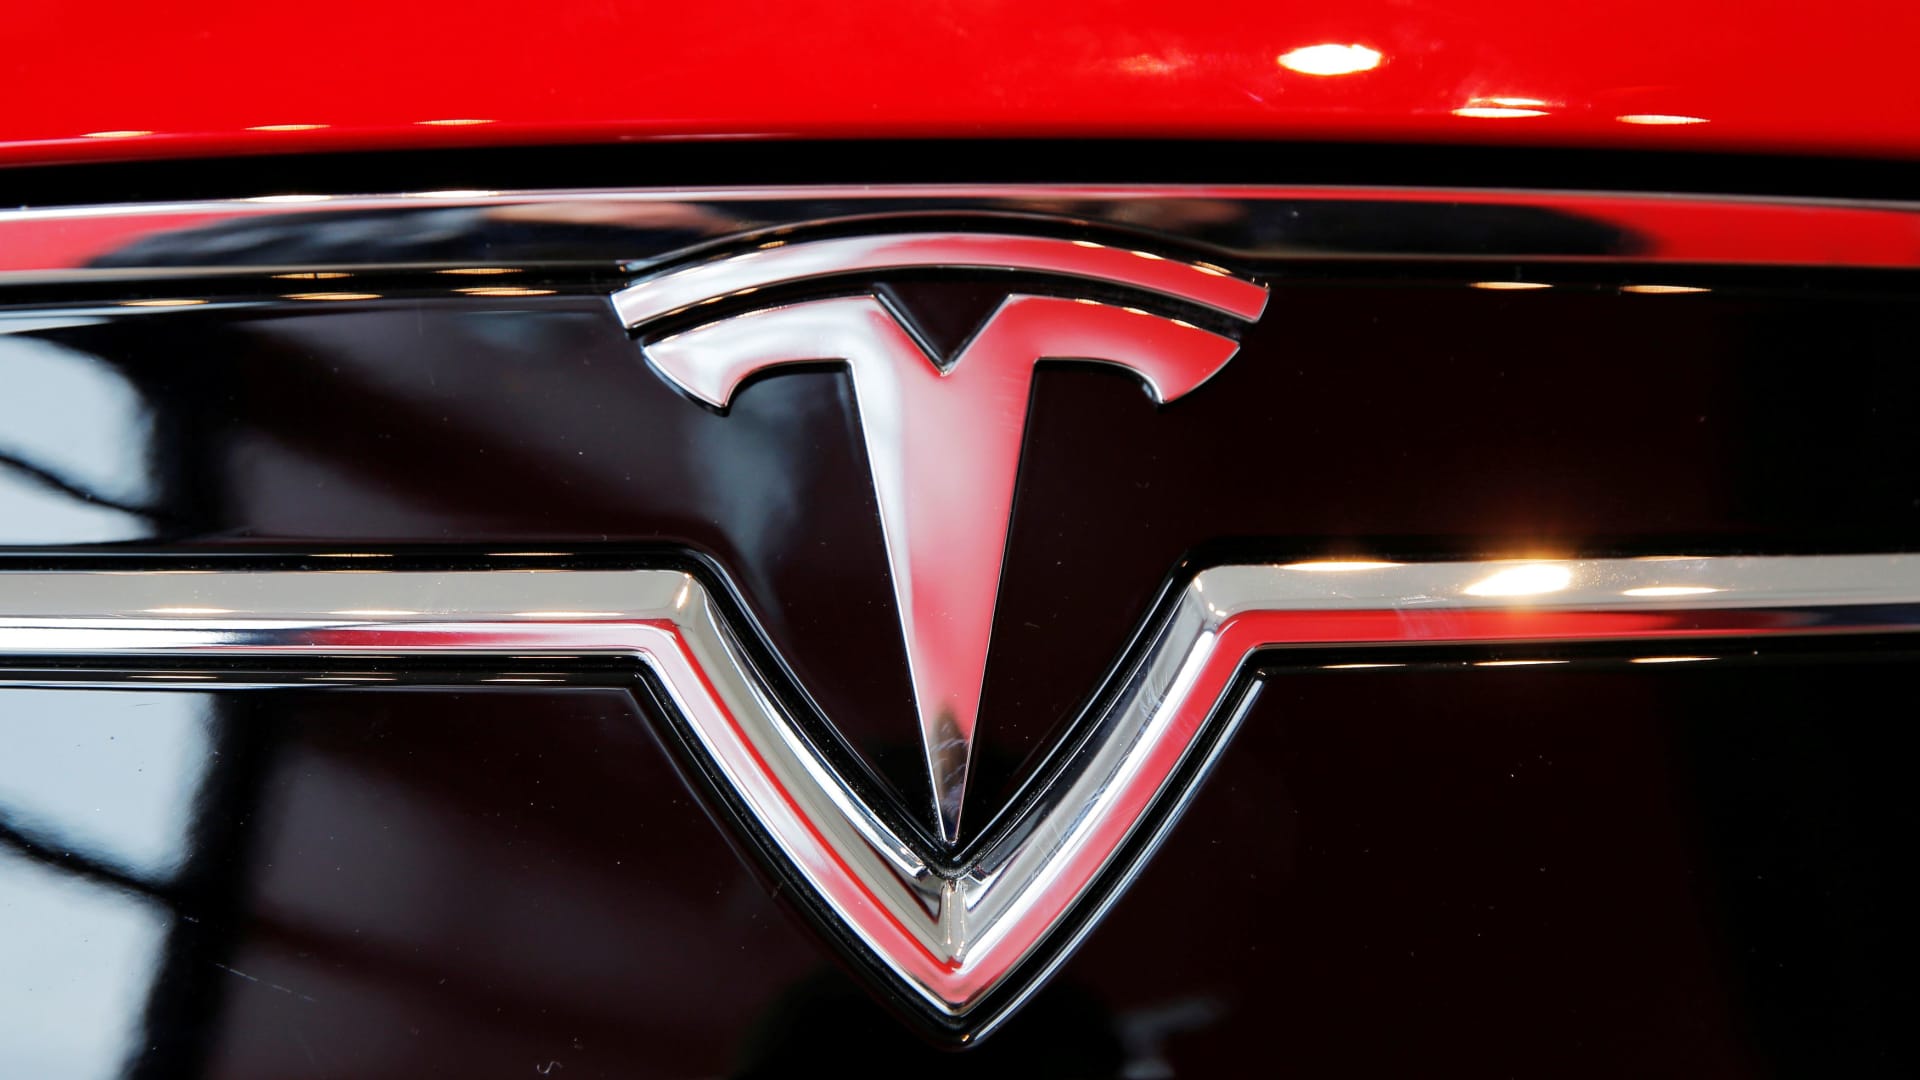 Tesla Takes a New Turn: Dropping Big Goals for a Future with Driverless Cars